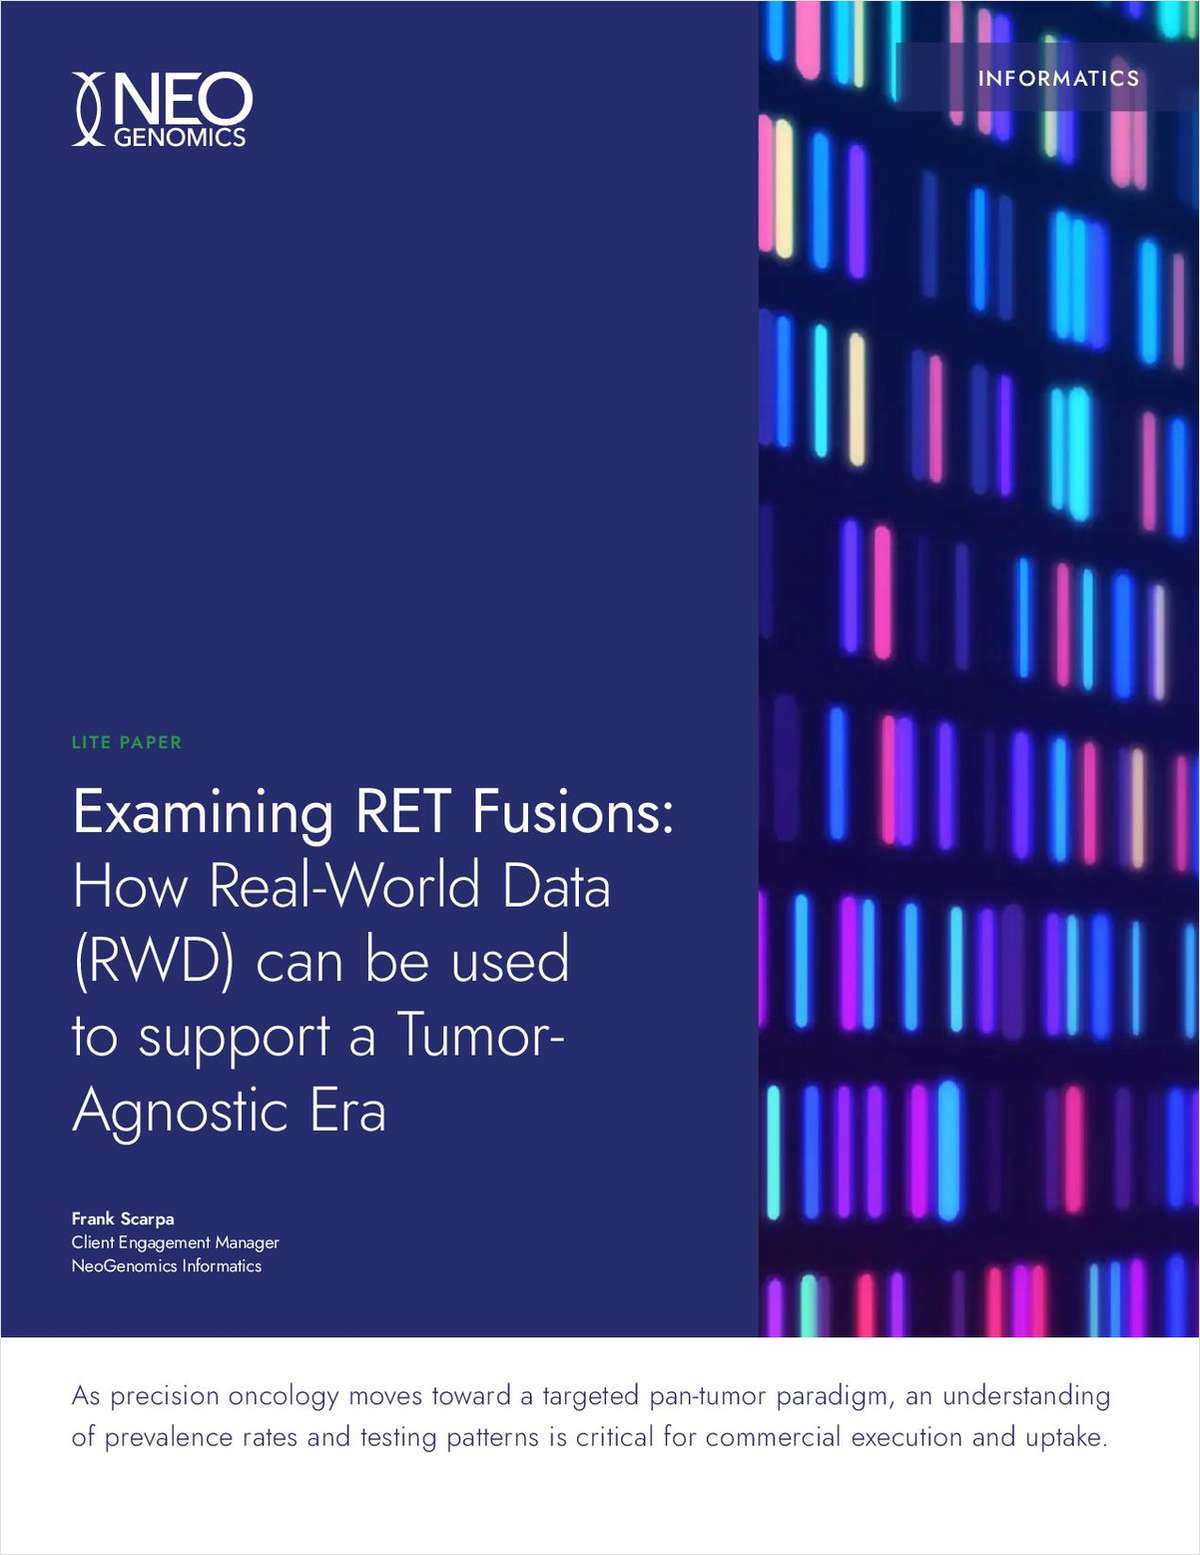 Examining RET Fusions: How Real-World Data (RWD) Can Support a Tumor-Agnostic Era